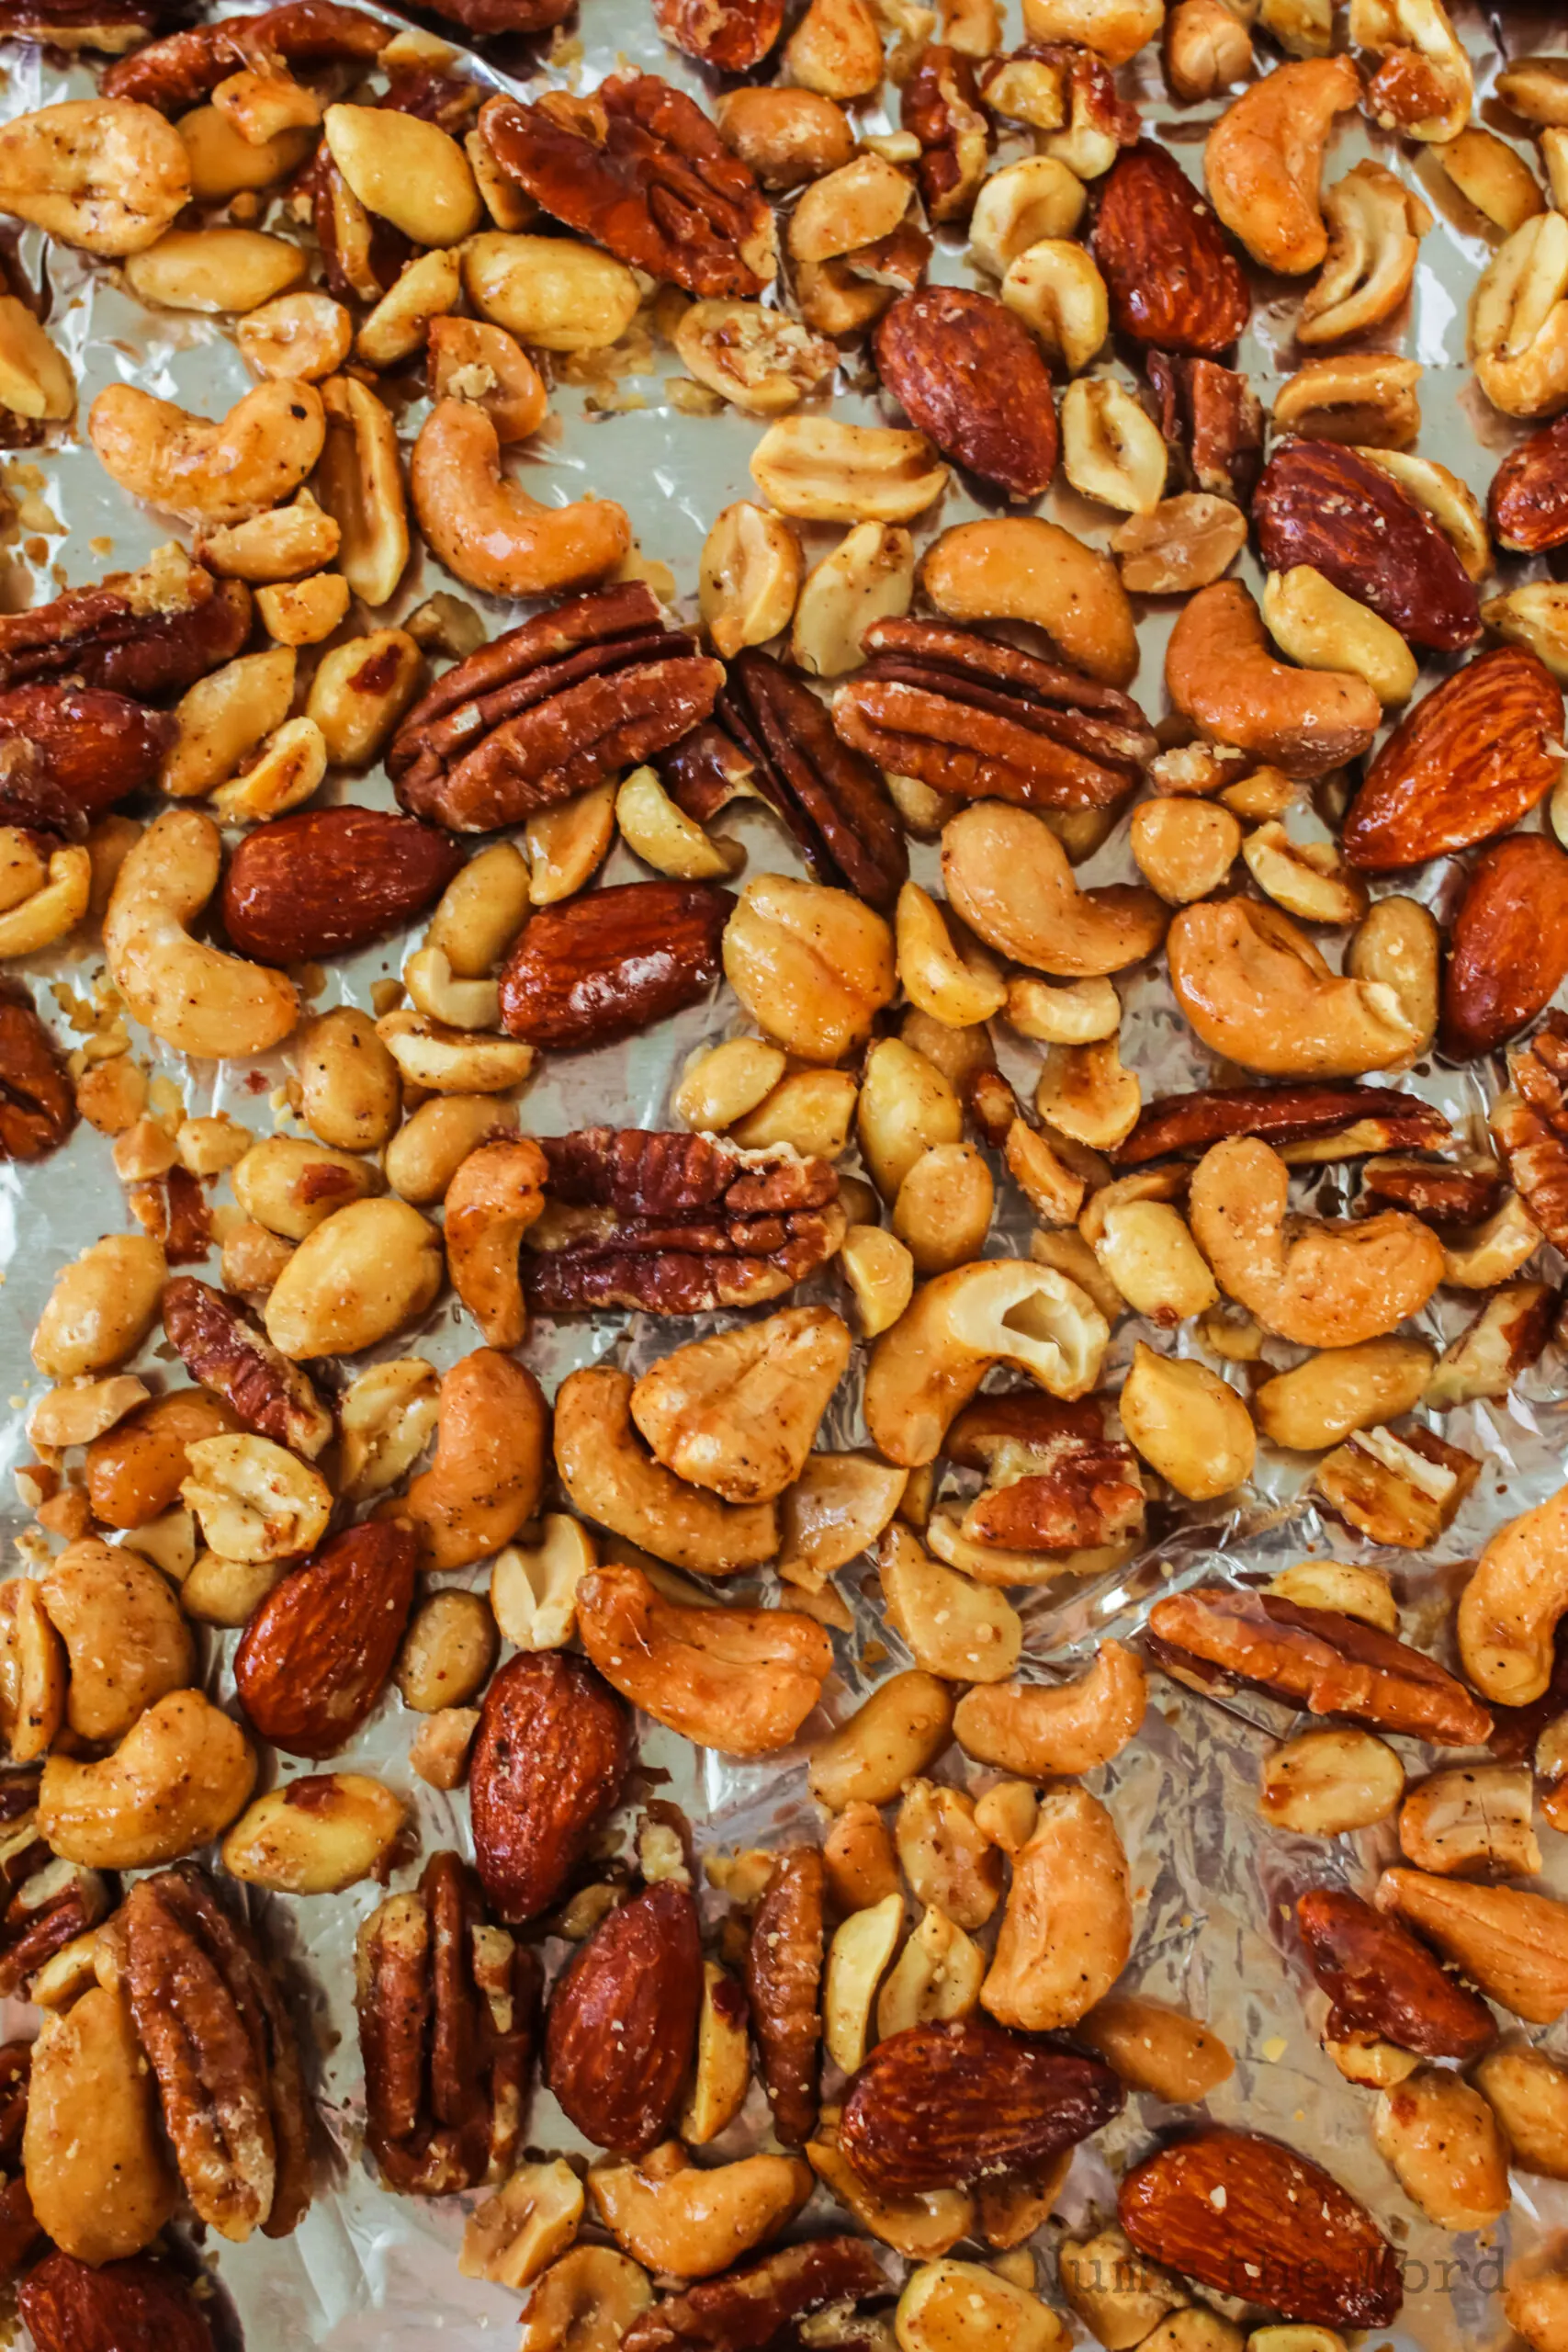 zoomed in image of cooked mixed nuts on cookie sheet